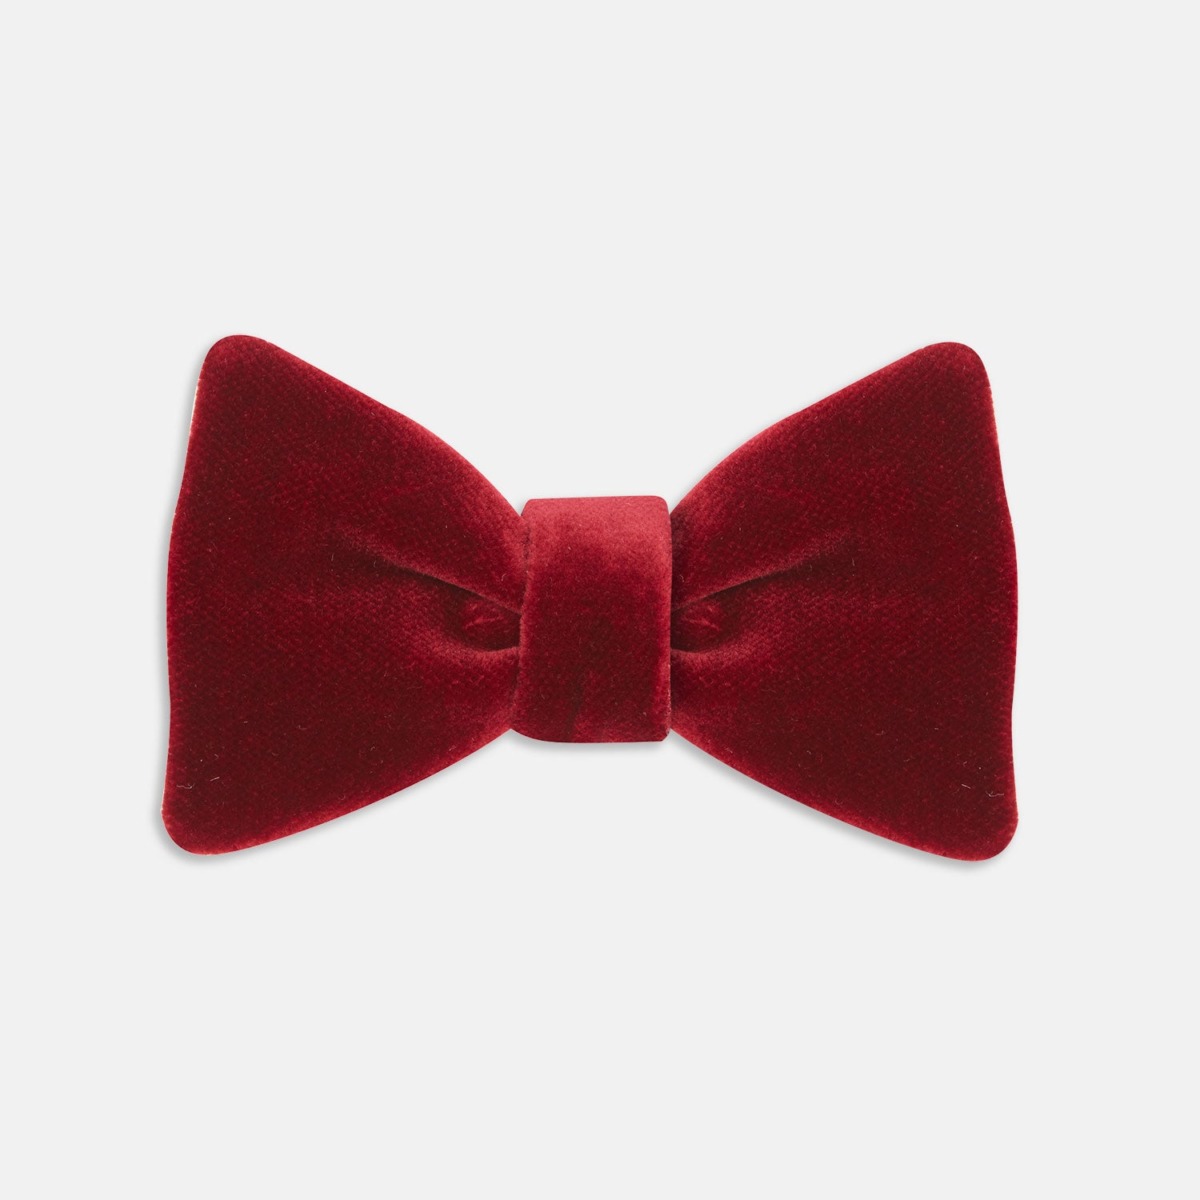 Turnbull And Asser - Man Bow Tie Burgundy from Turnbull & Asser GOOFASH